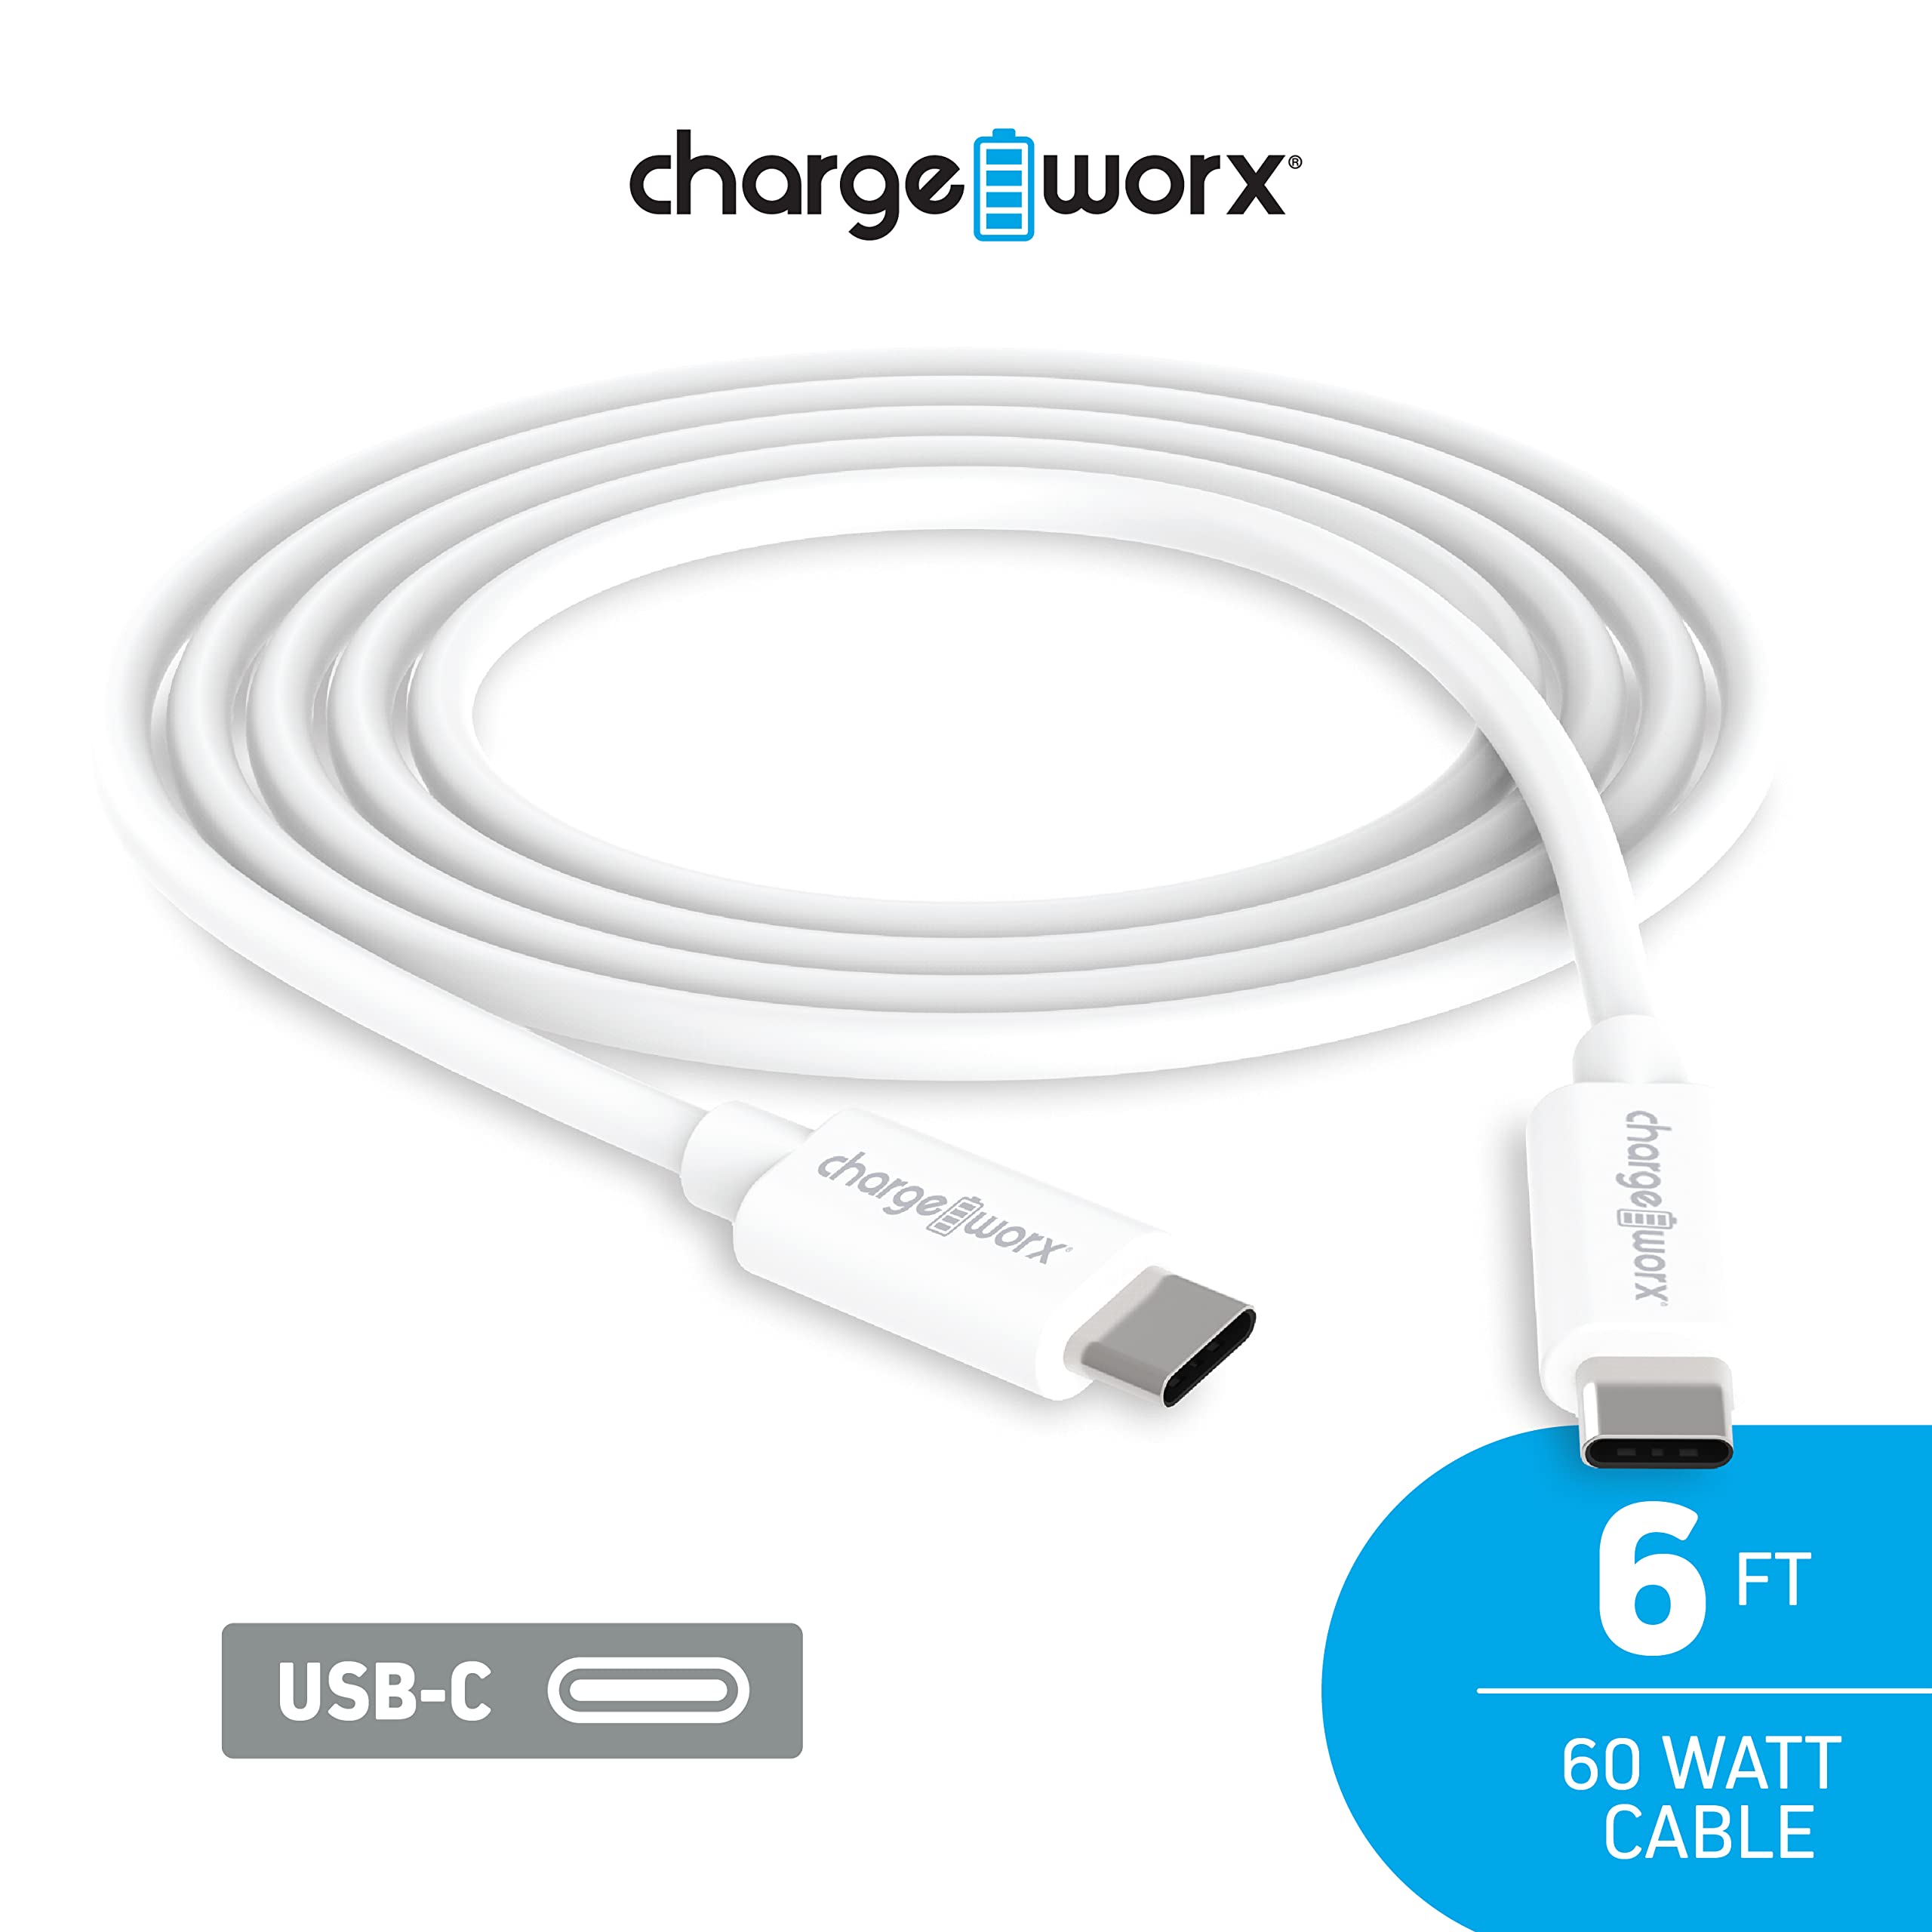 Chargeworx PD USB-C to USB-C Cable 6 Feet White